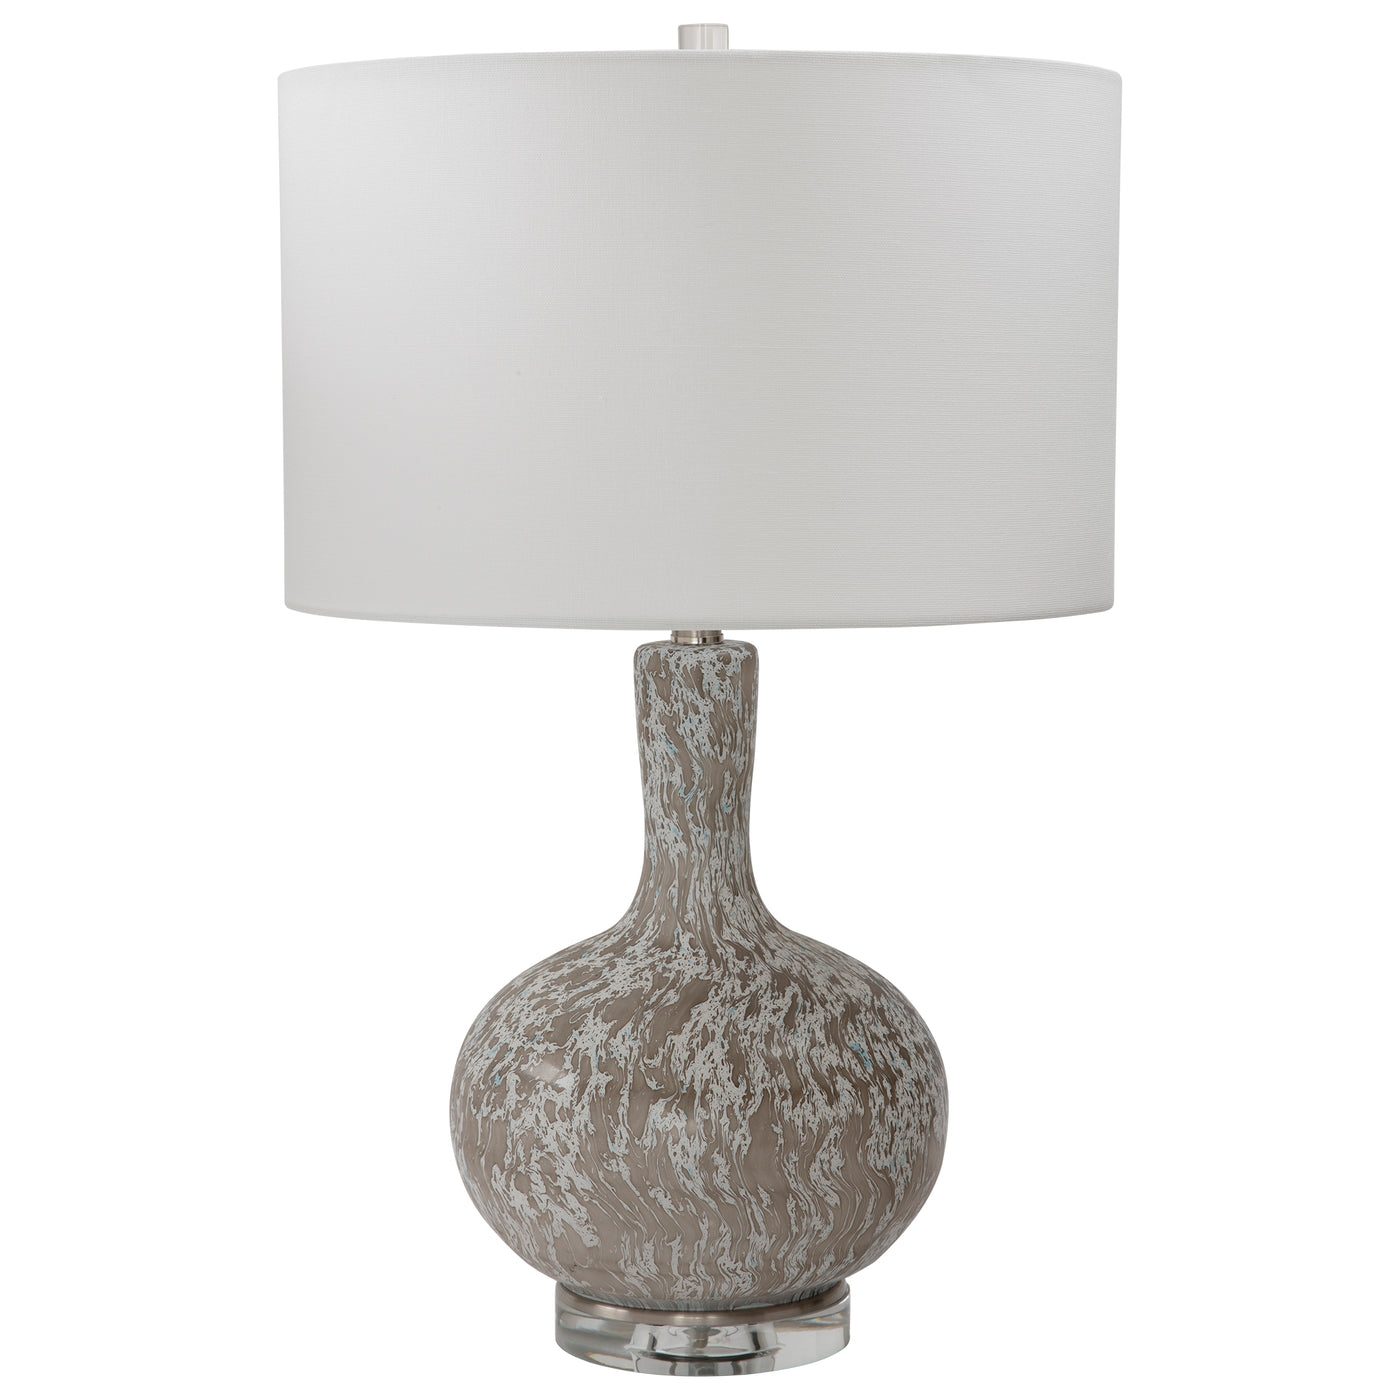 This Glass Table Lamp Features A Timeless Shape Finished In A Distressed White With A Myriad Of Black And Gray Flecks, Acc...